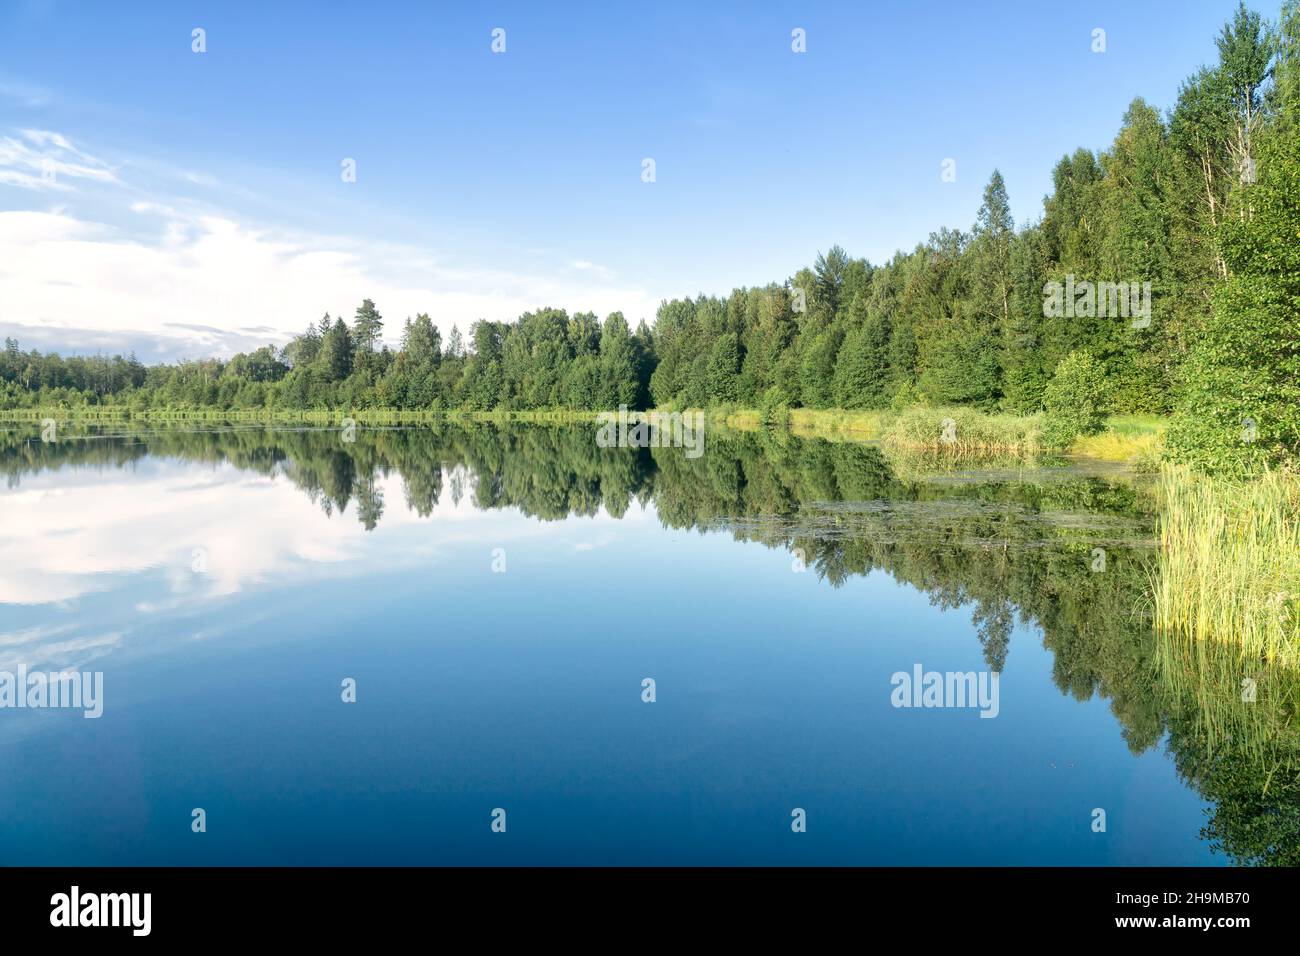 Summer landscape on woodland lake, Podlasie, Poland. Reflection of trees and blue sky with white clouds in the water. Travel and outdoor recreation. Stock Photo